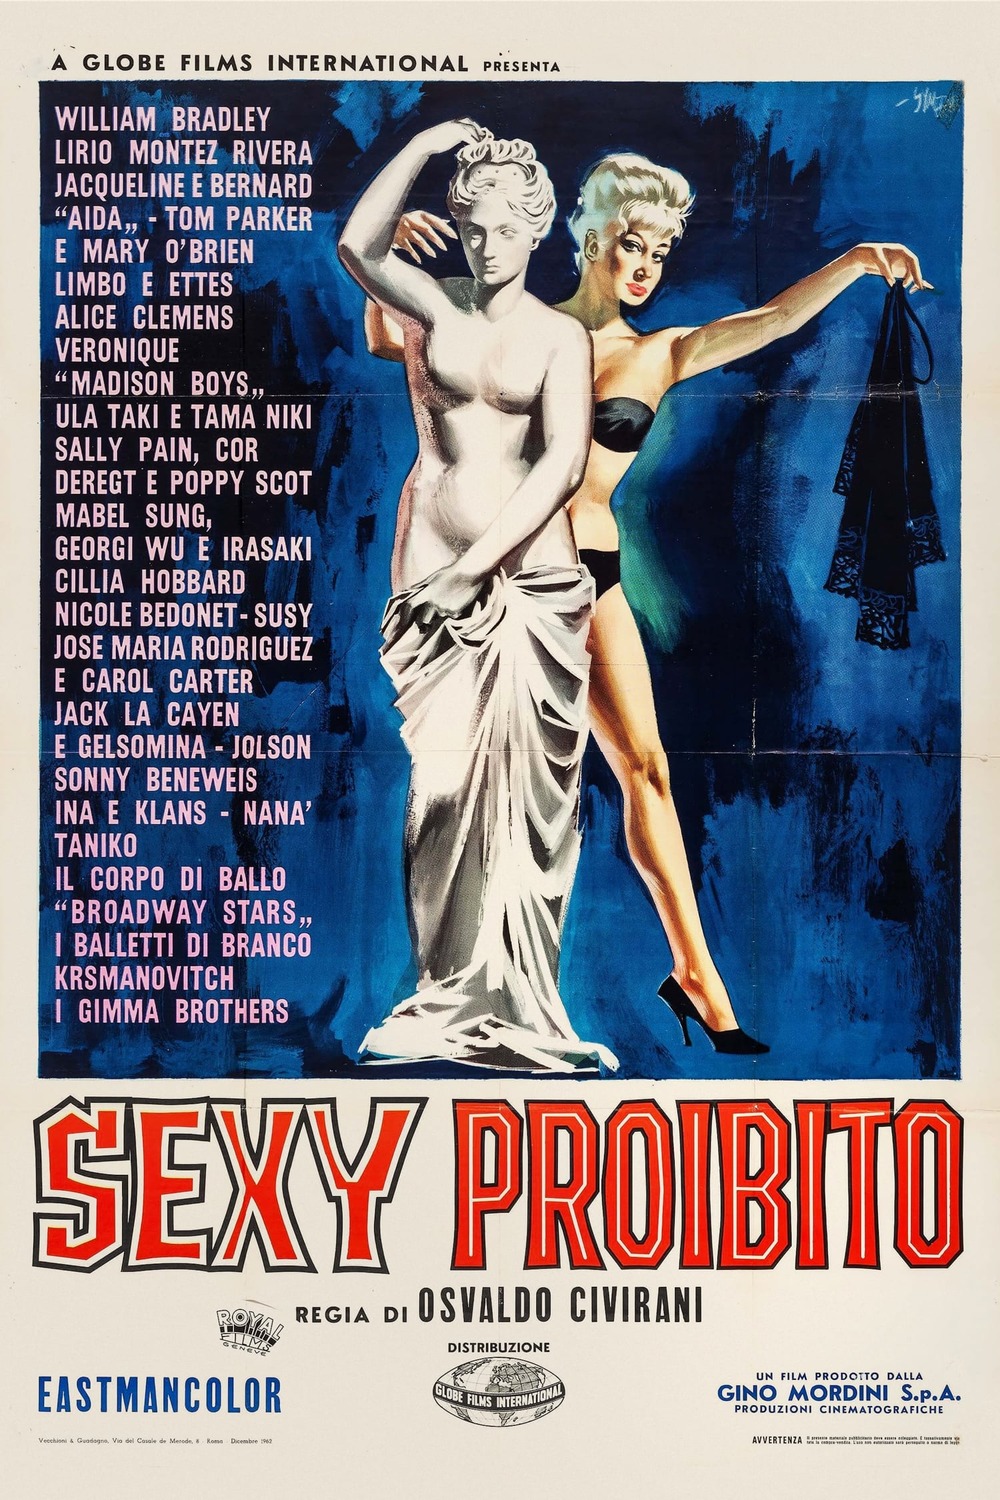 Extra Large Movie Poster Image for Sexy proibitissimo 